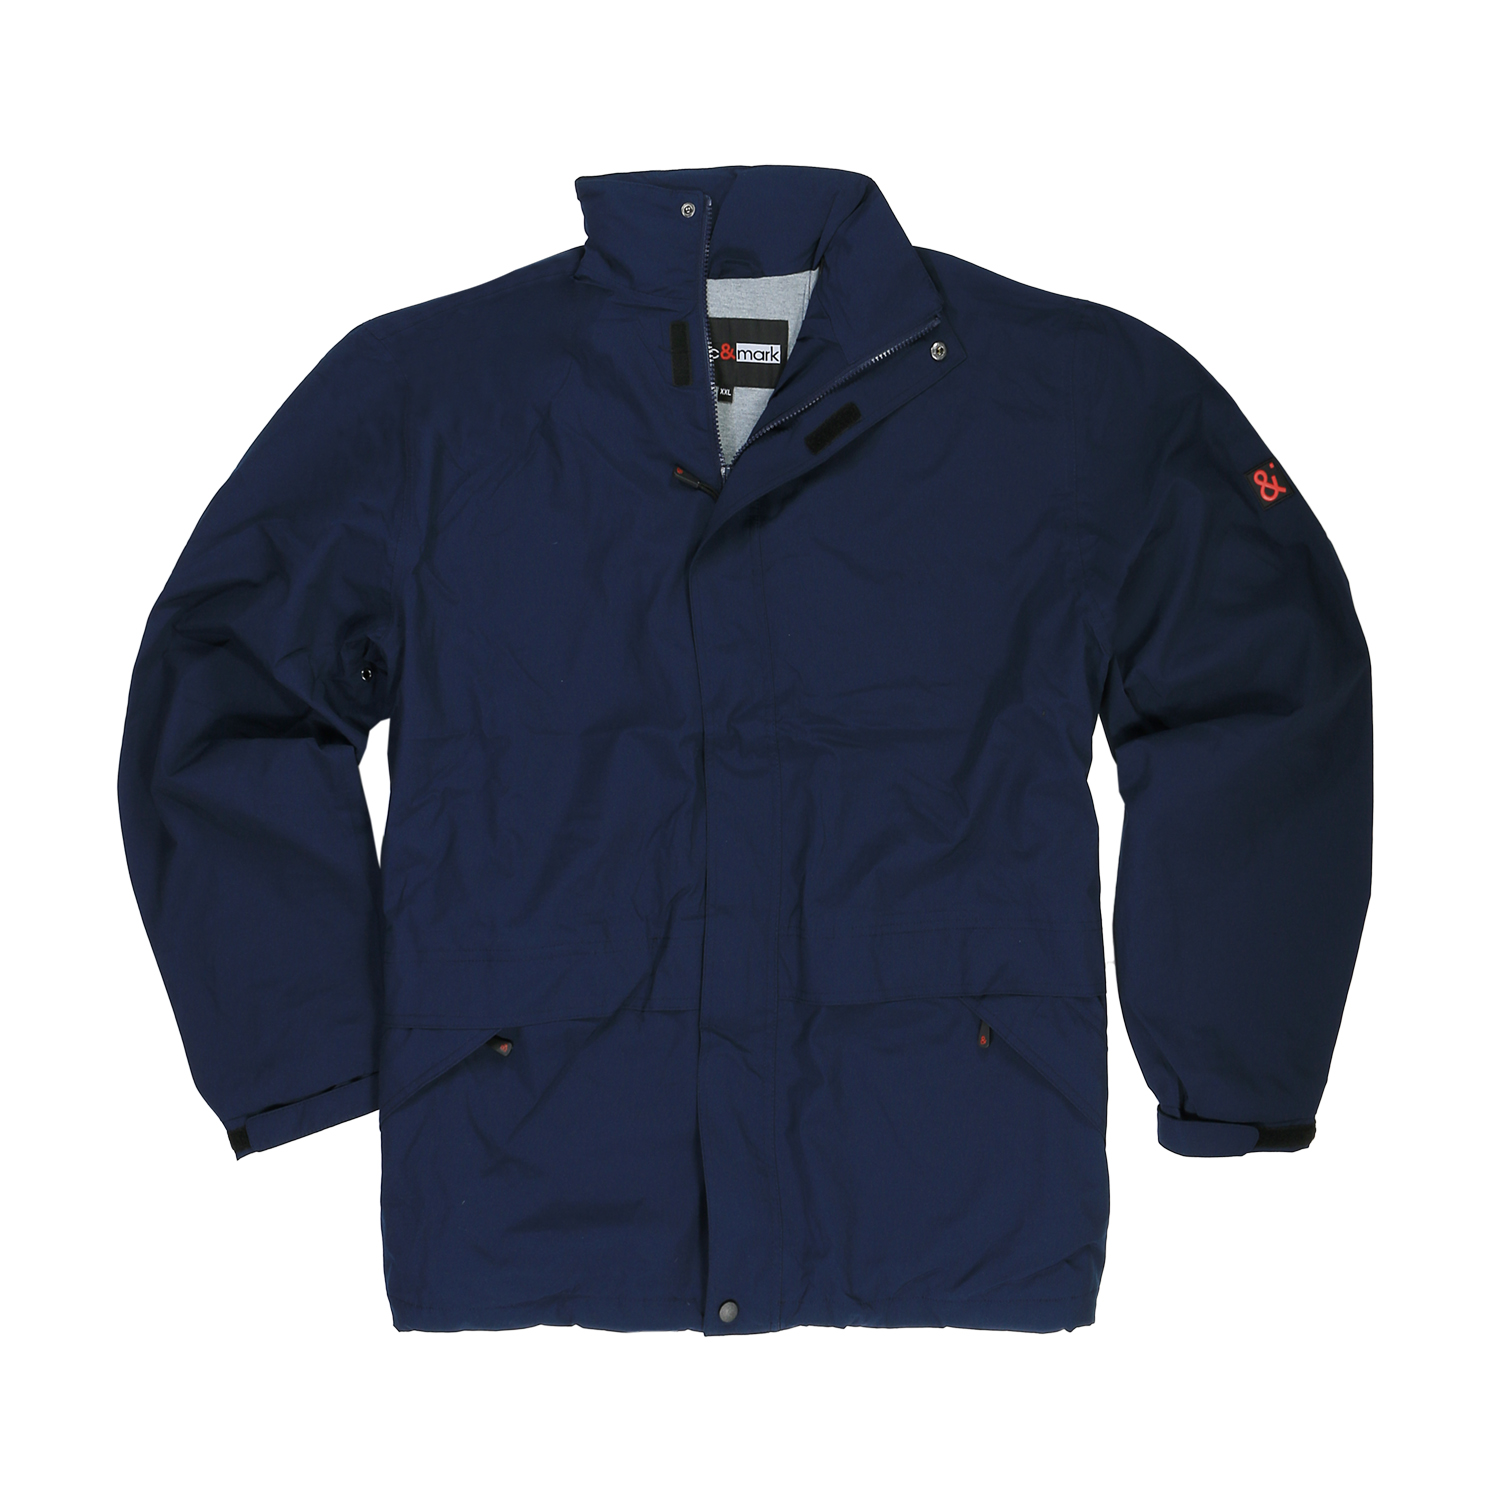 Darkblue wind and rain jacket from Abraxas in plus sizes up to 12XL